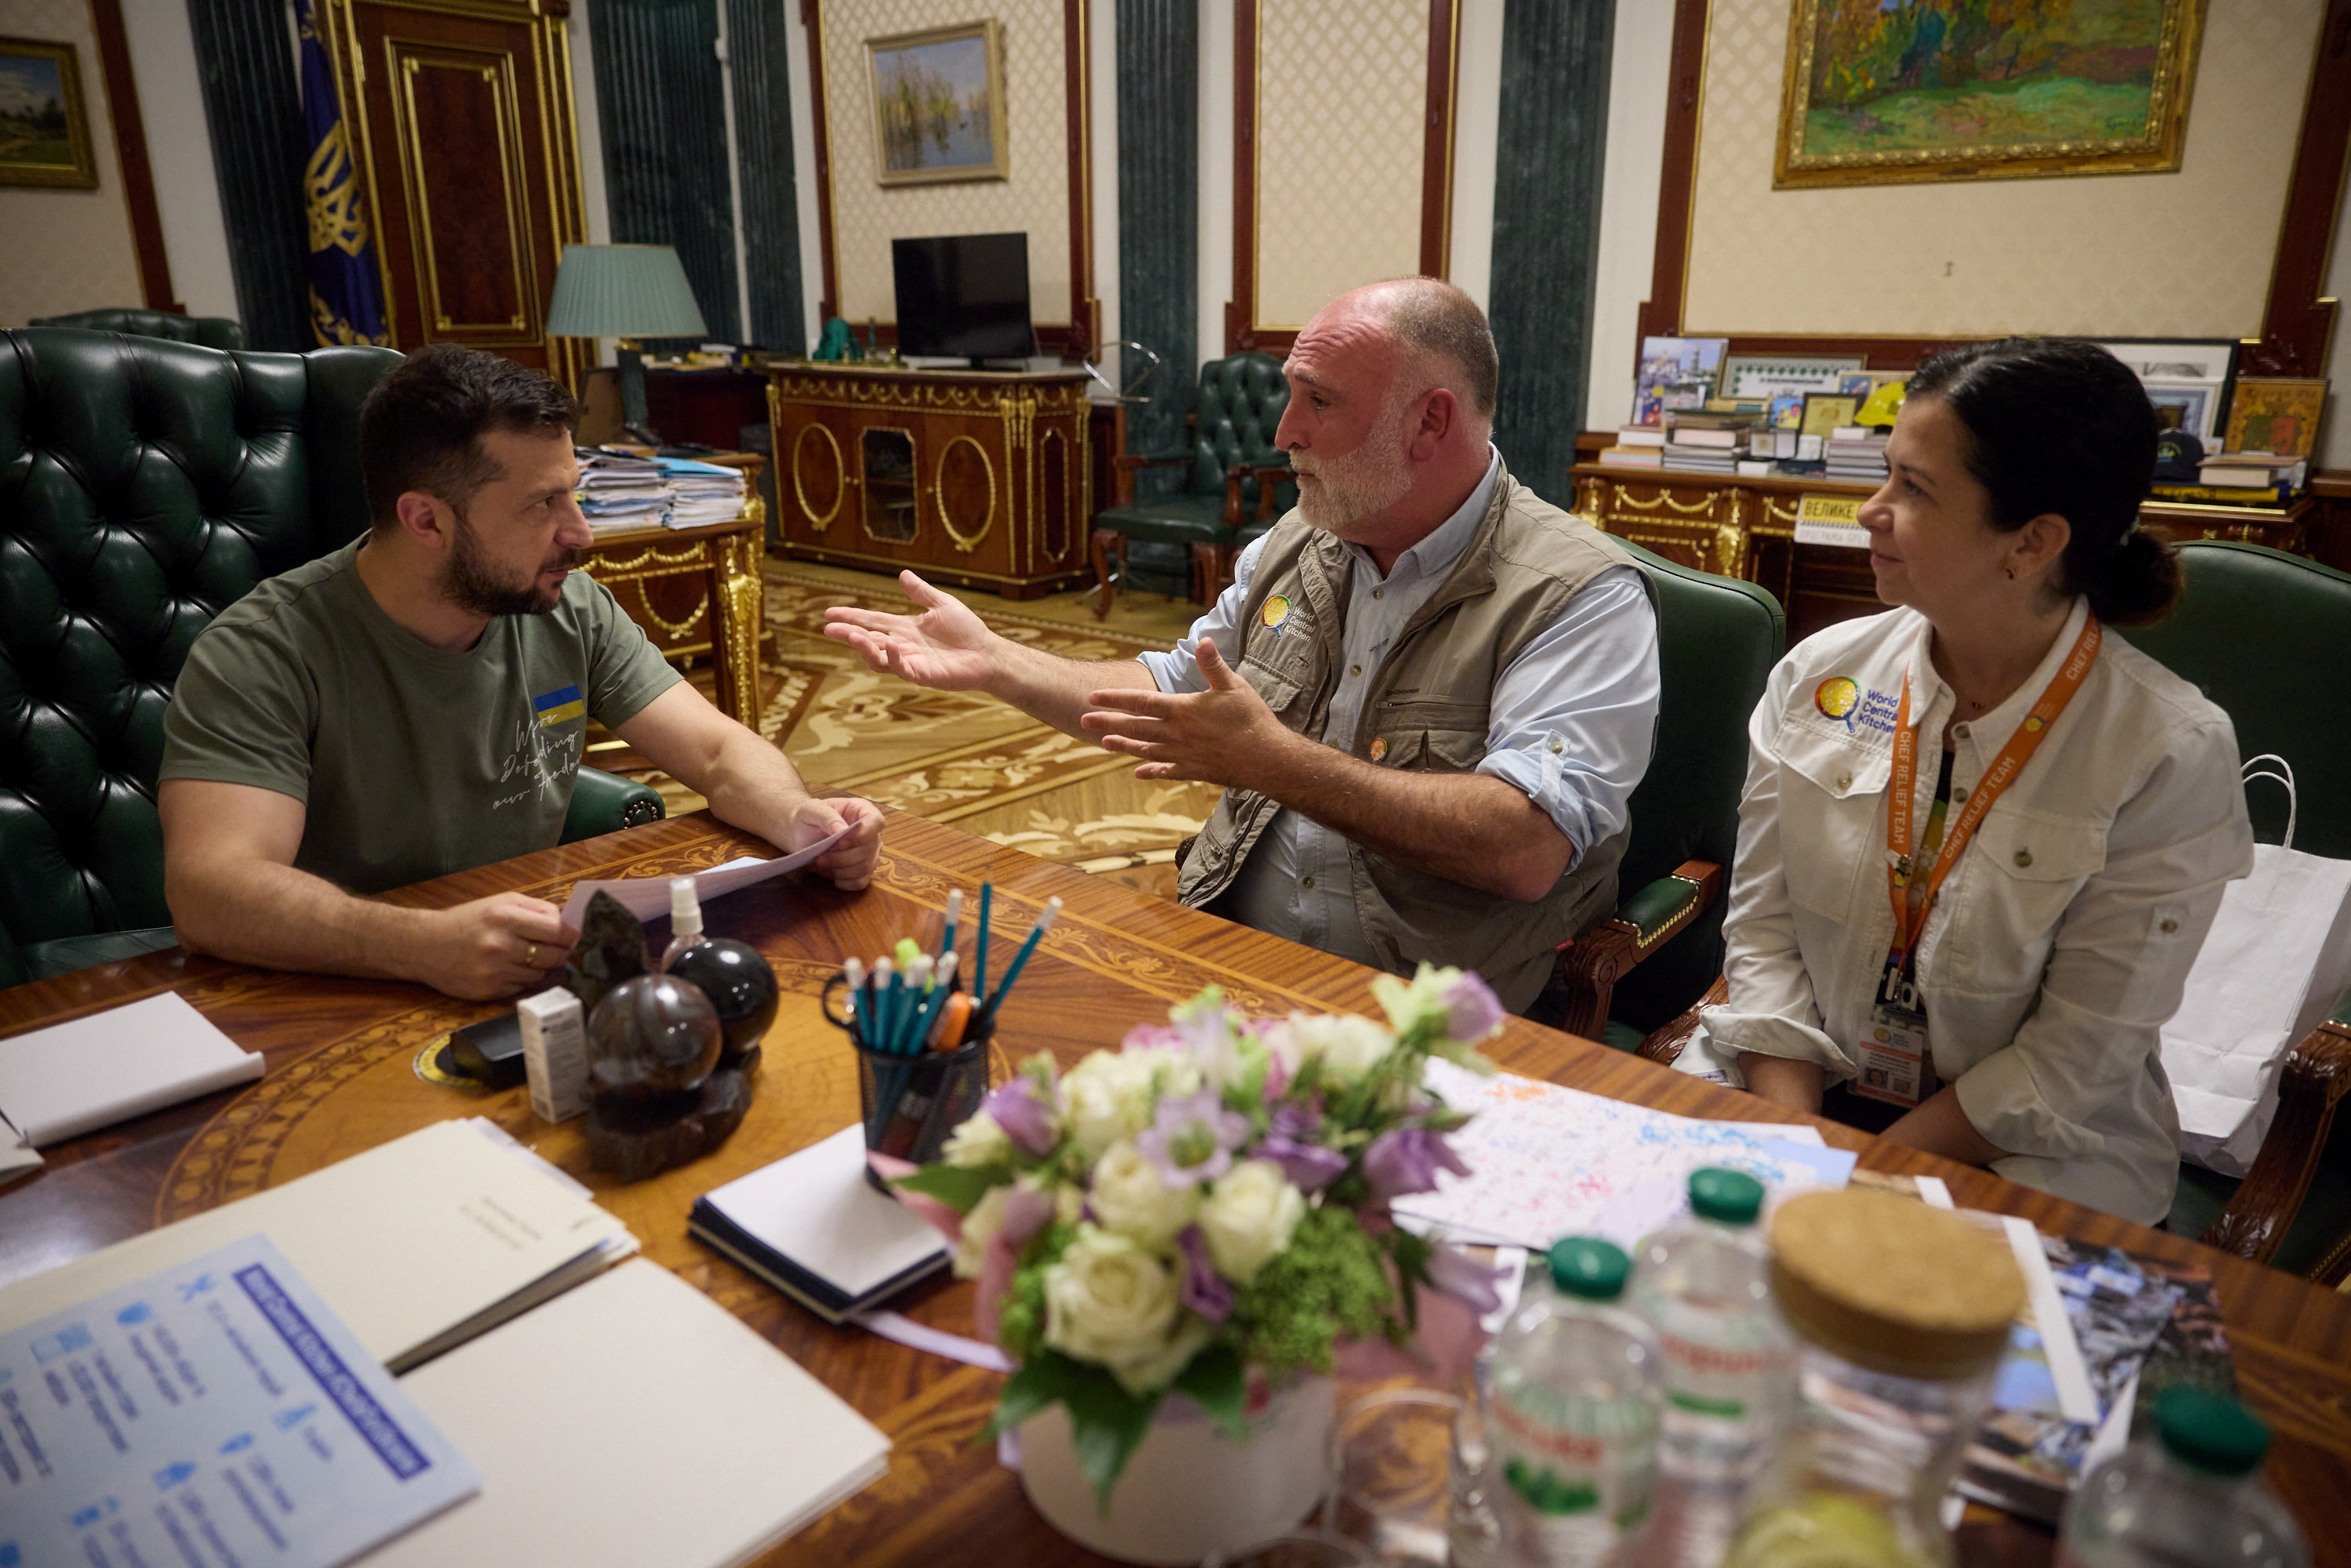 Chef Andres from World Central Kitchen attends a meeting with Ukraine's President Zelenskiy in Kyiv